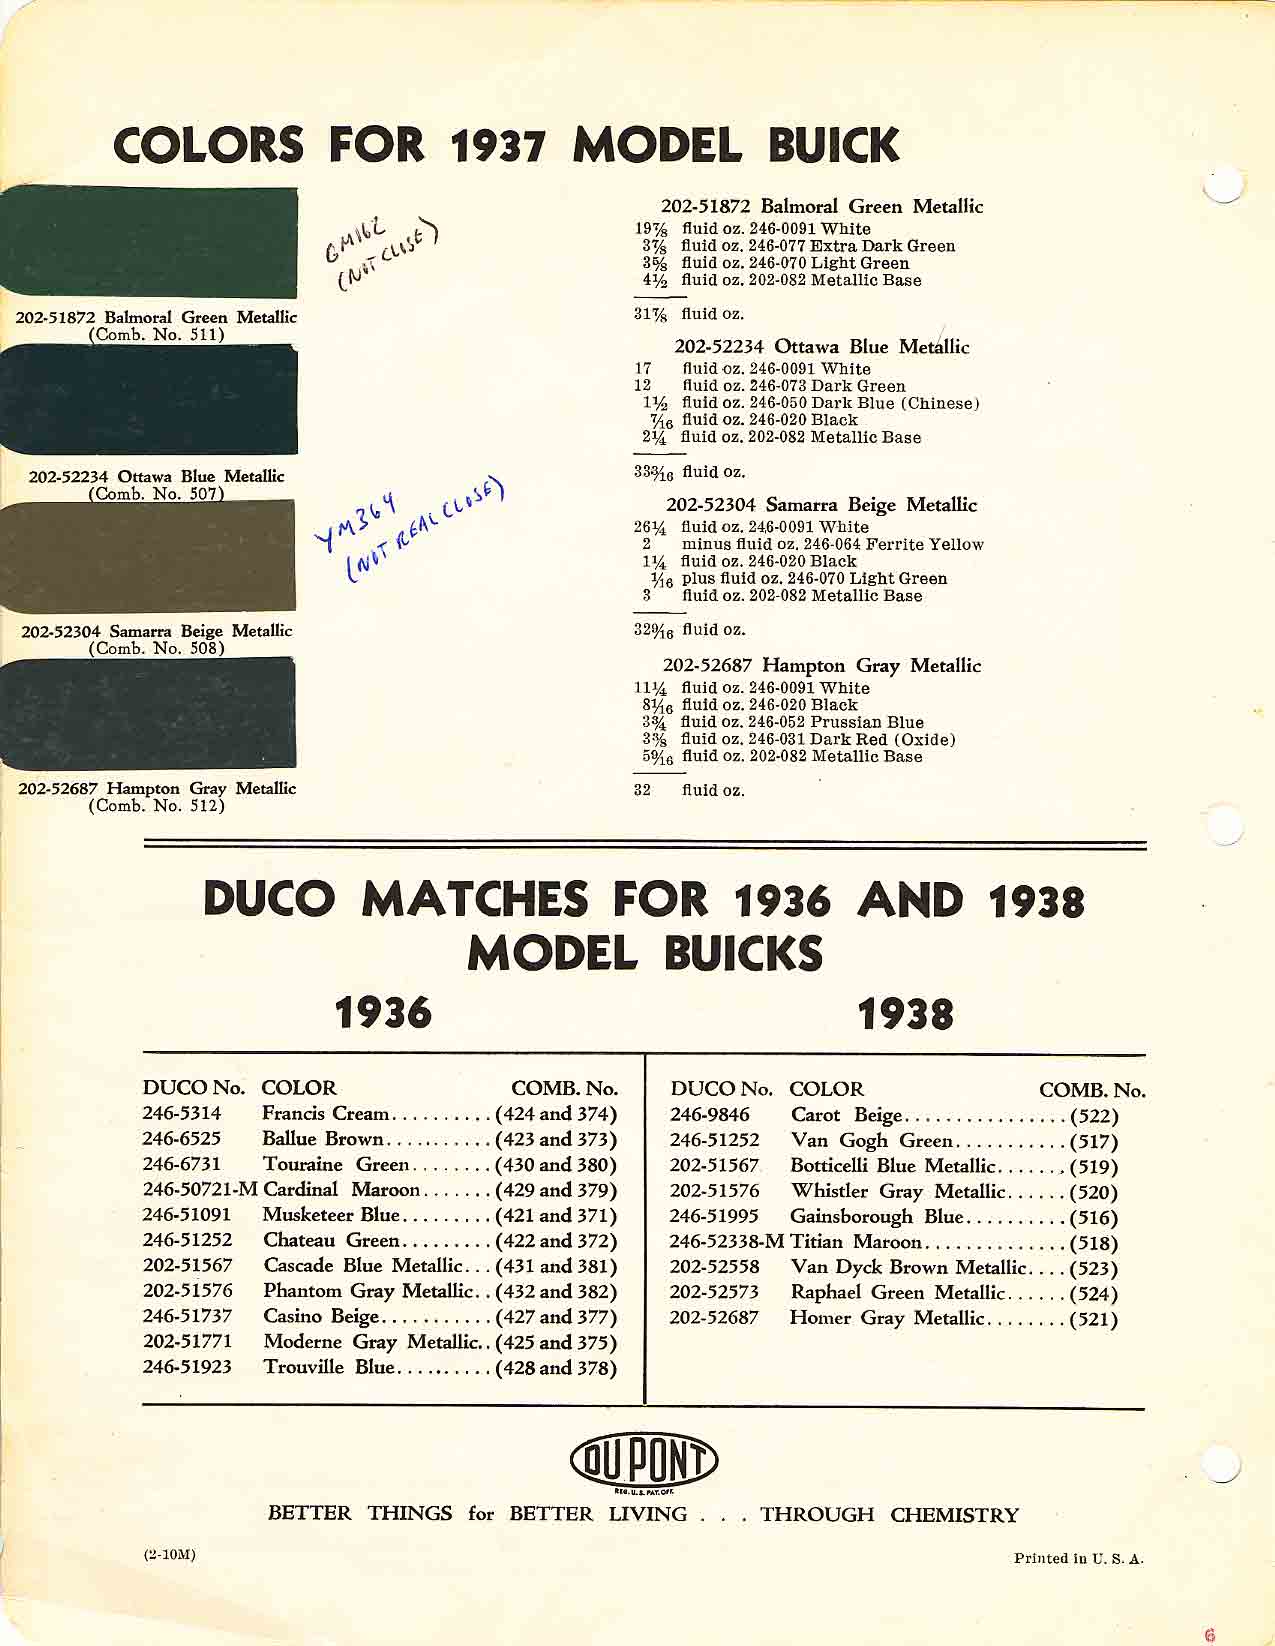 Paint Colors and Codes used on Buick In 1937